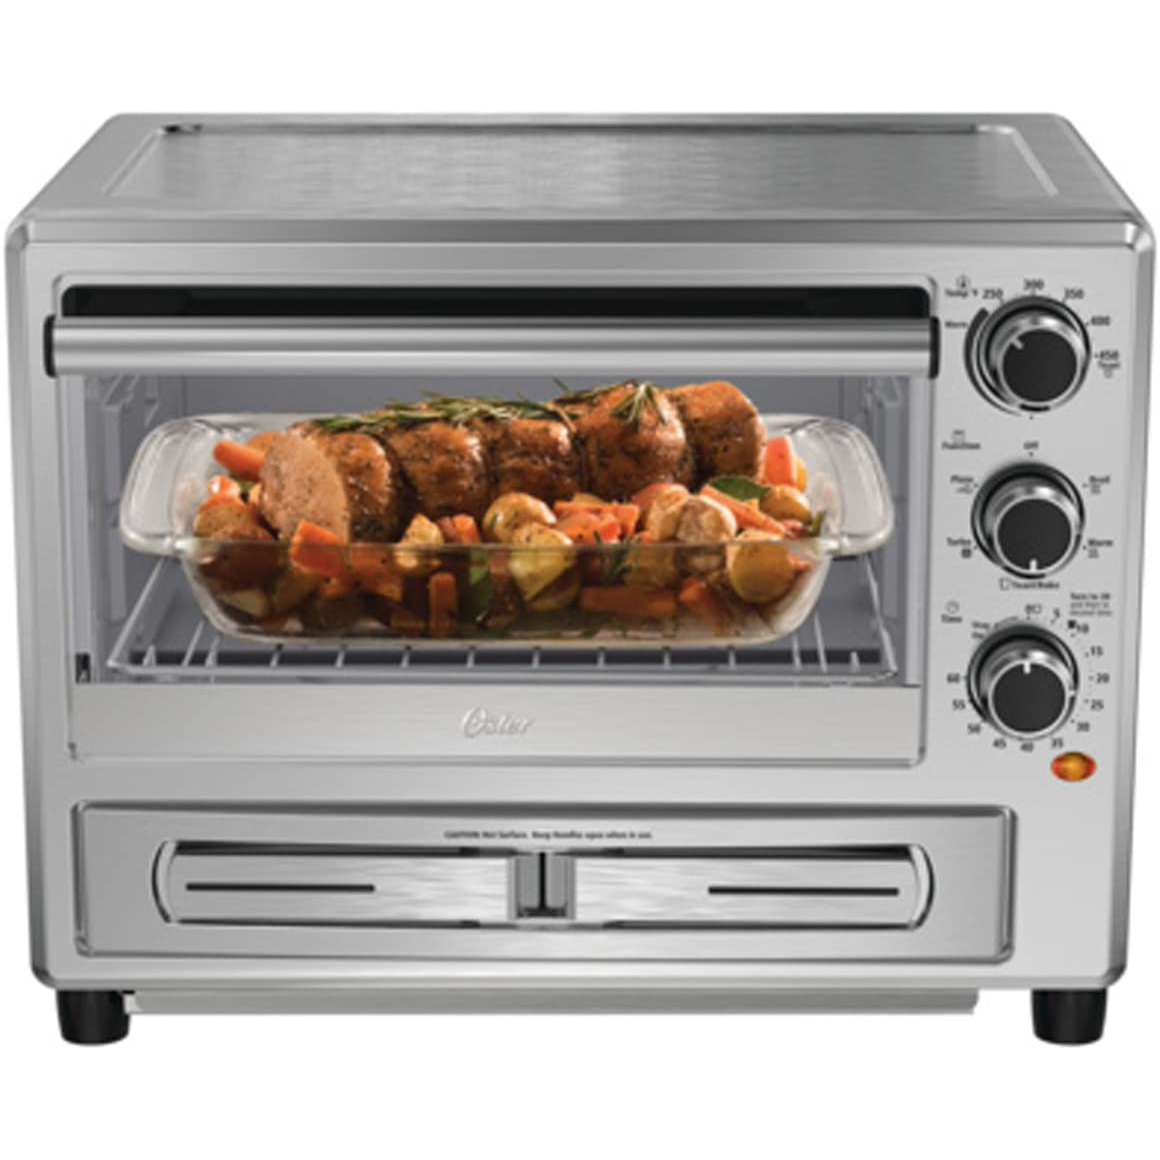 Oster Turbo Convection Toaster Oven w/ Pizza Drawer, Stainless Steel